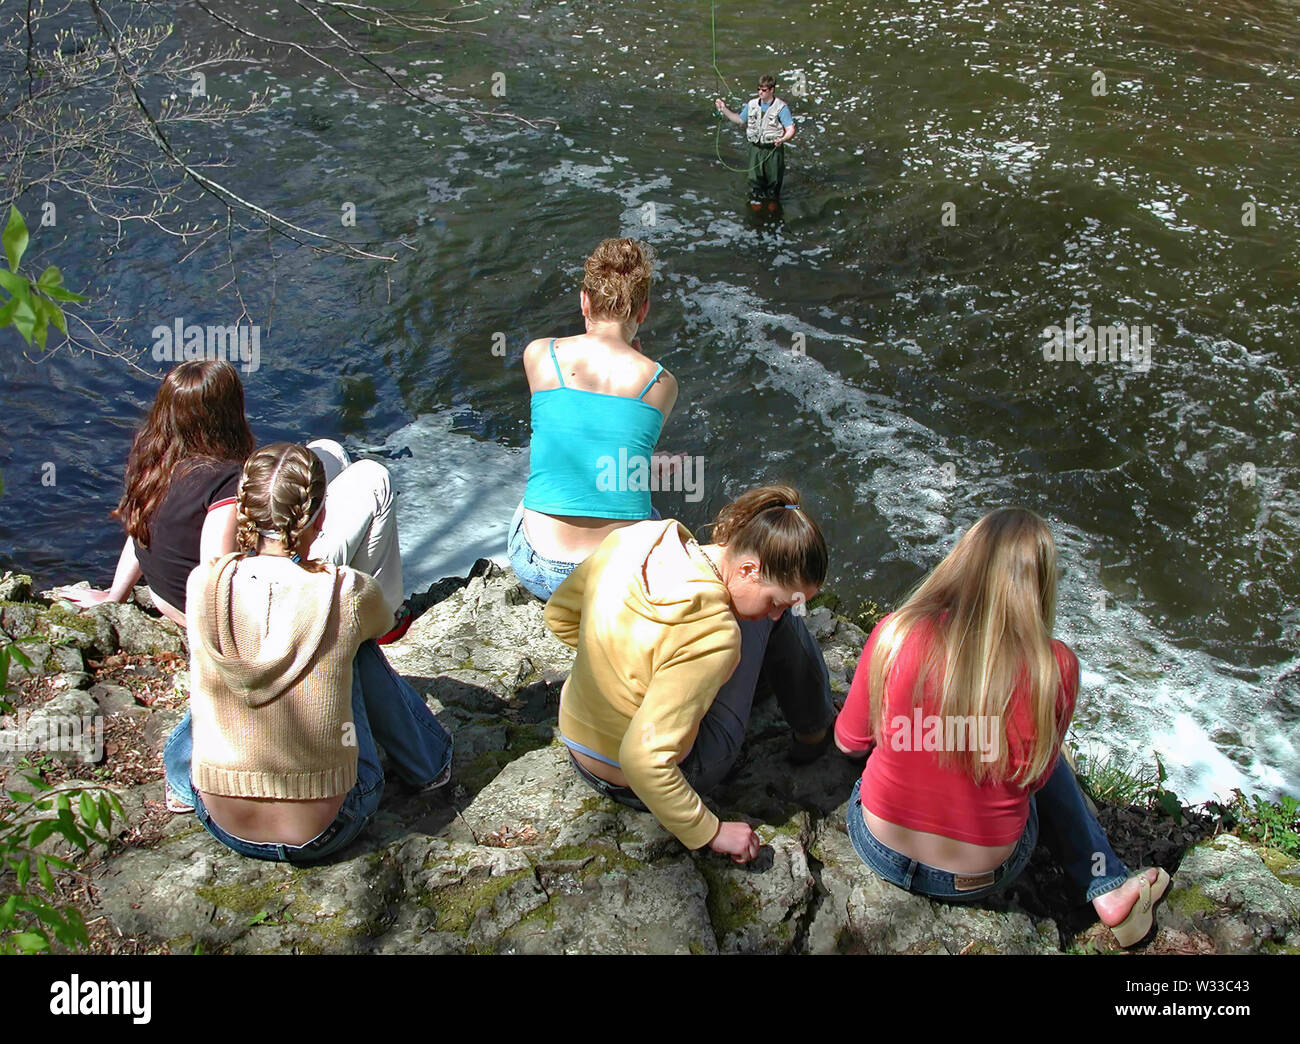 Middlefield, CT USA. May 2016. Young women thinking and sitting on a cliff looking down watching a fisherman in action. Stock Photo